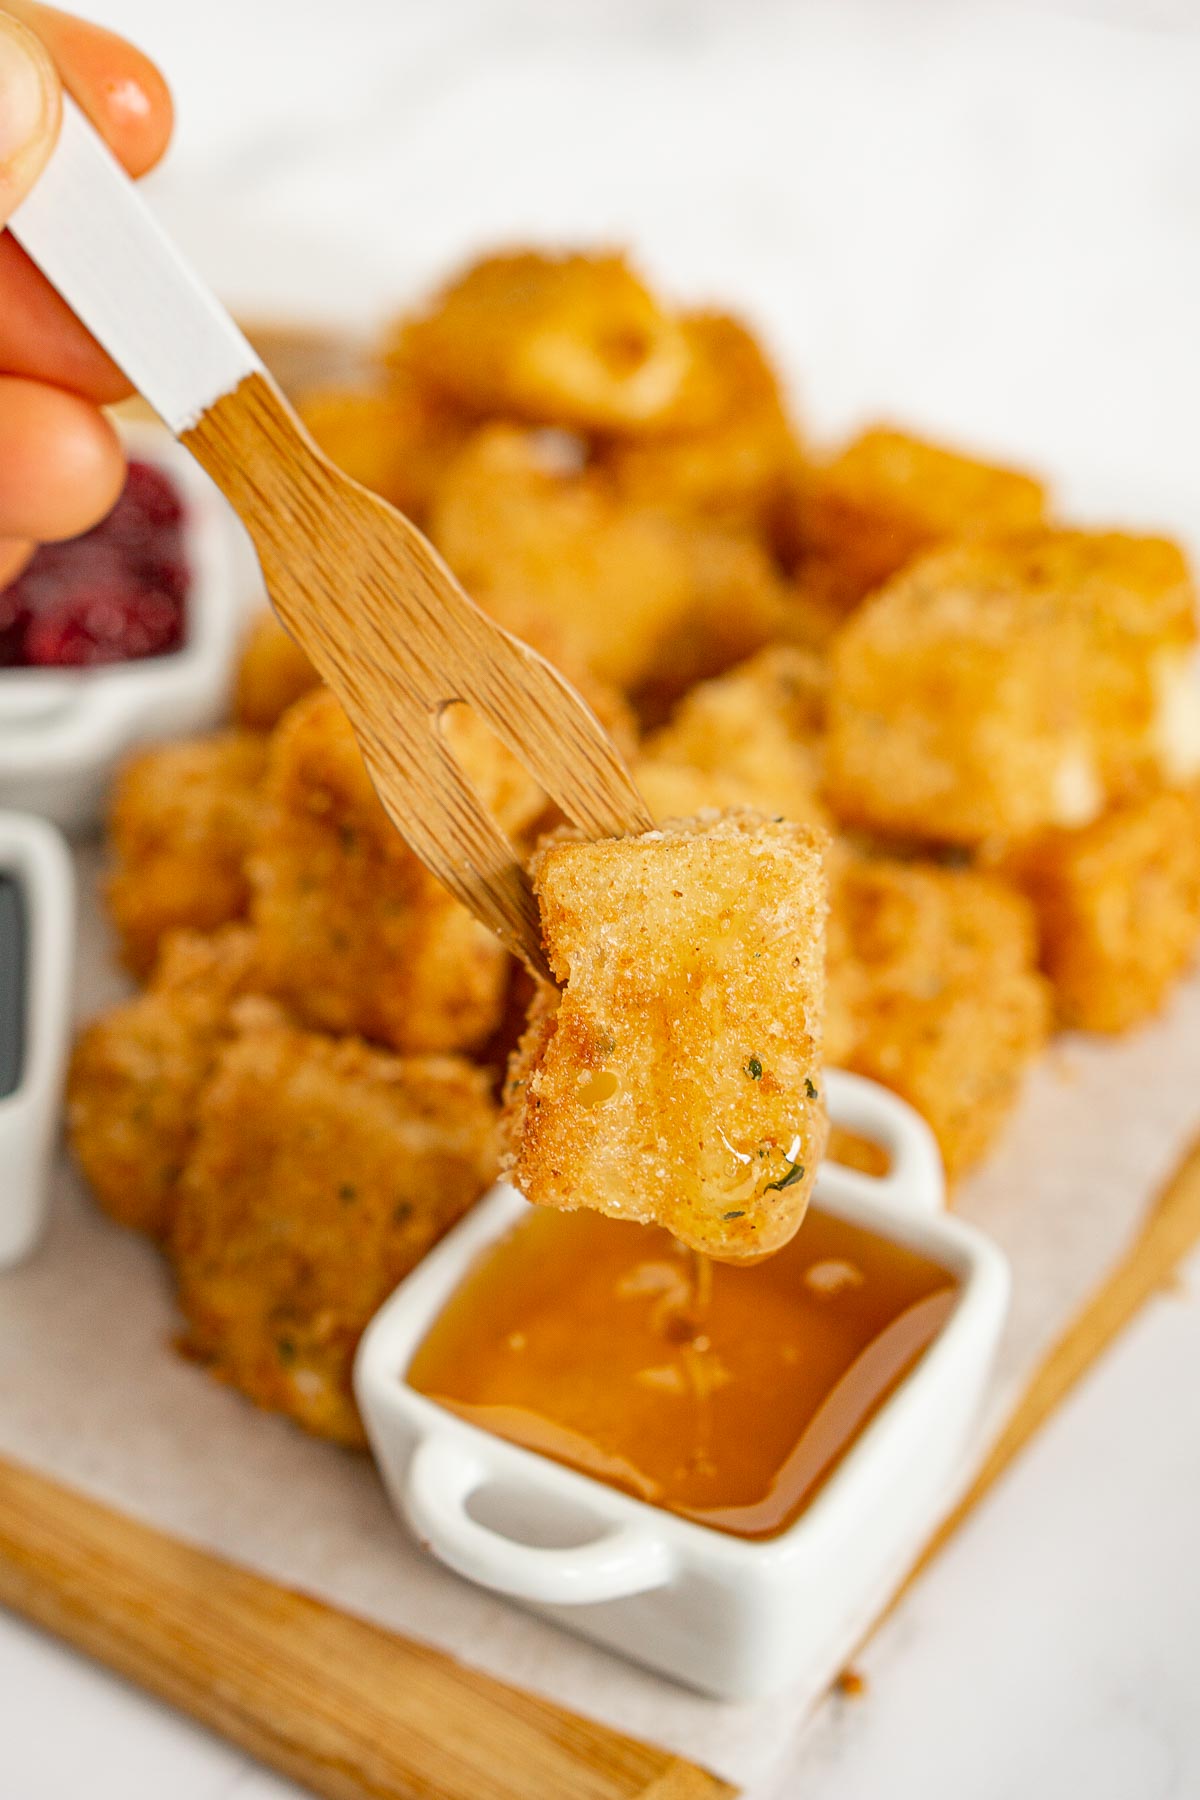 Dipping fried brie bite into honey